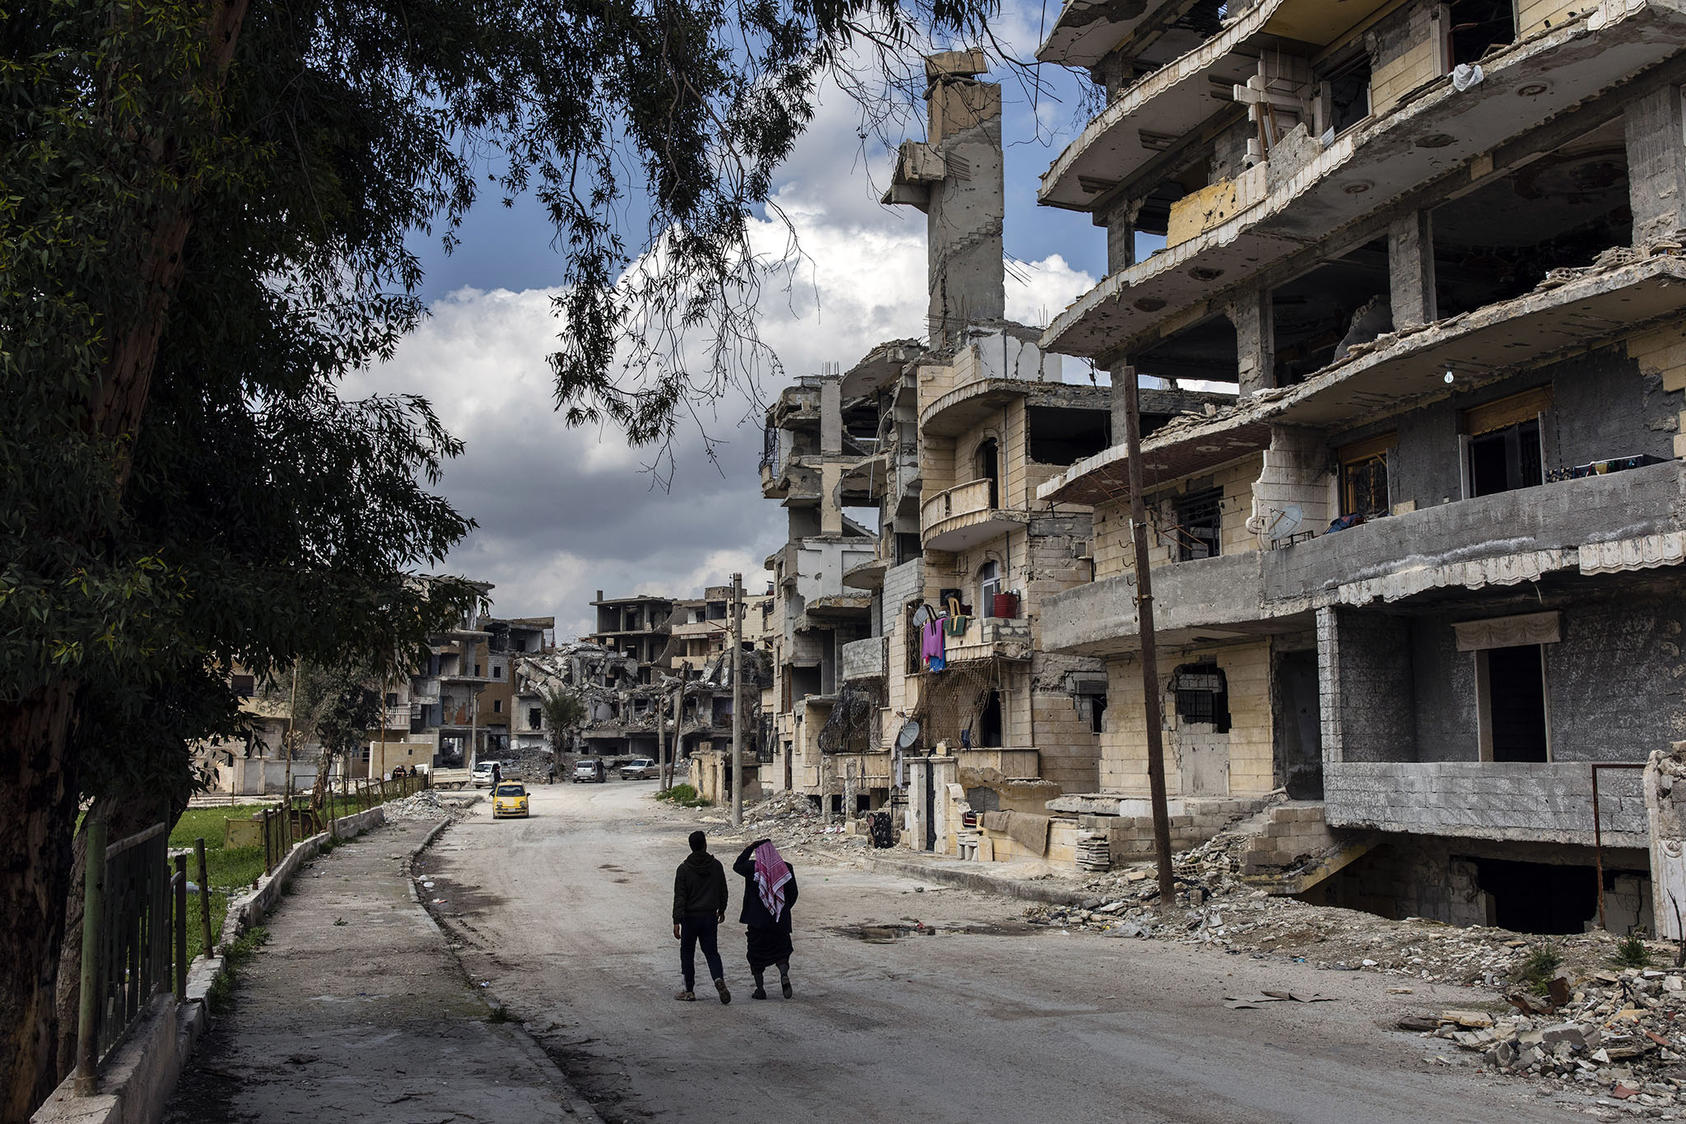 Two men walk through a heavily damaged neighborhood in Raqqa, Syria, on April 4, 2019, more than a year after the city’s liberation from the Islamic State. (Ivor Prickett/New York Times)